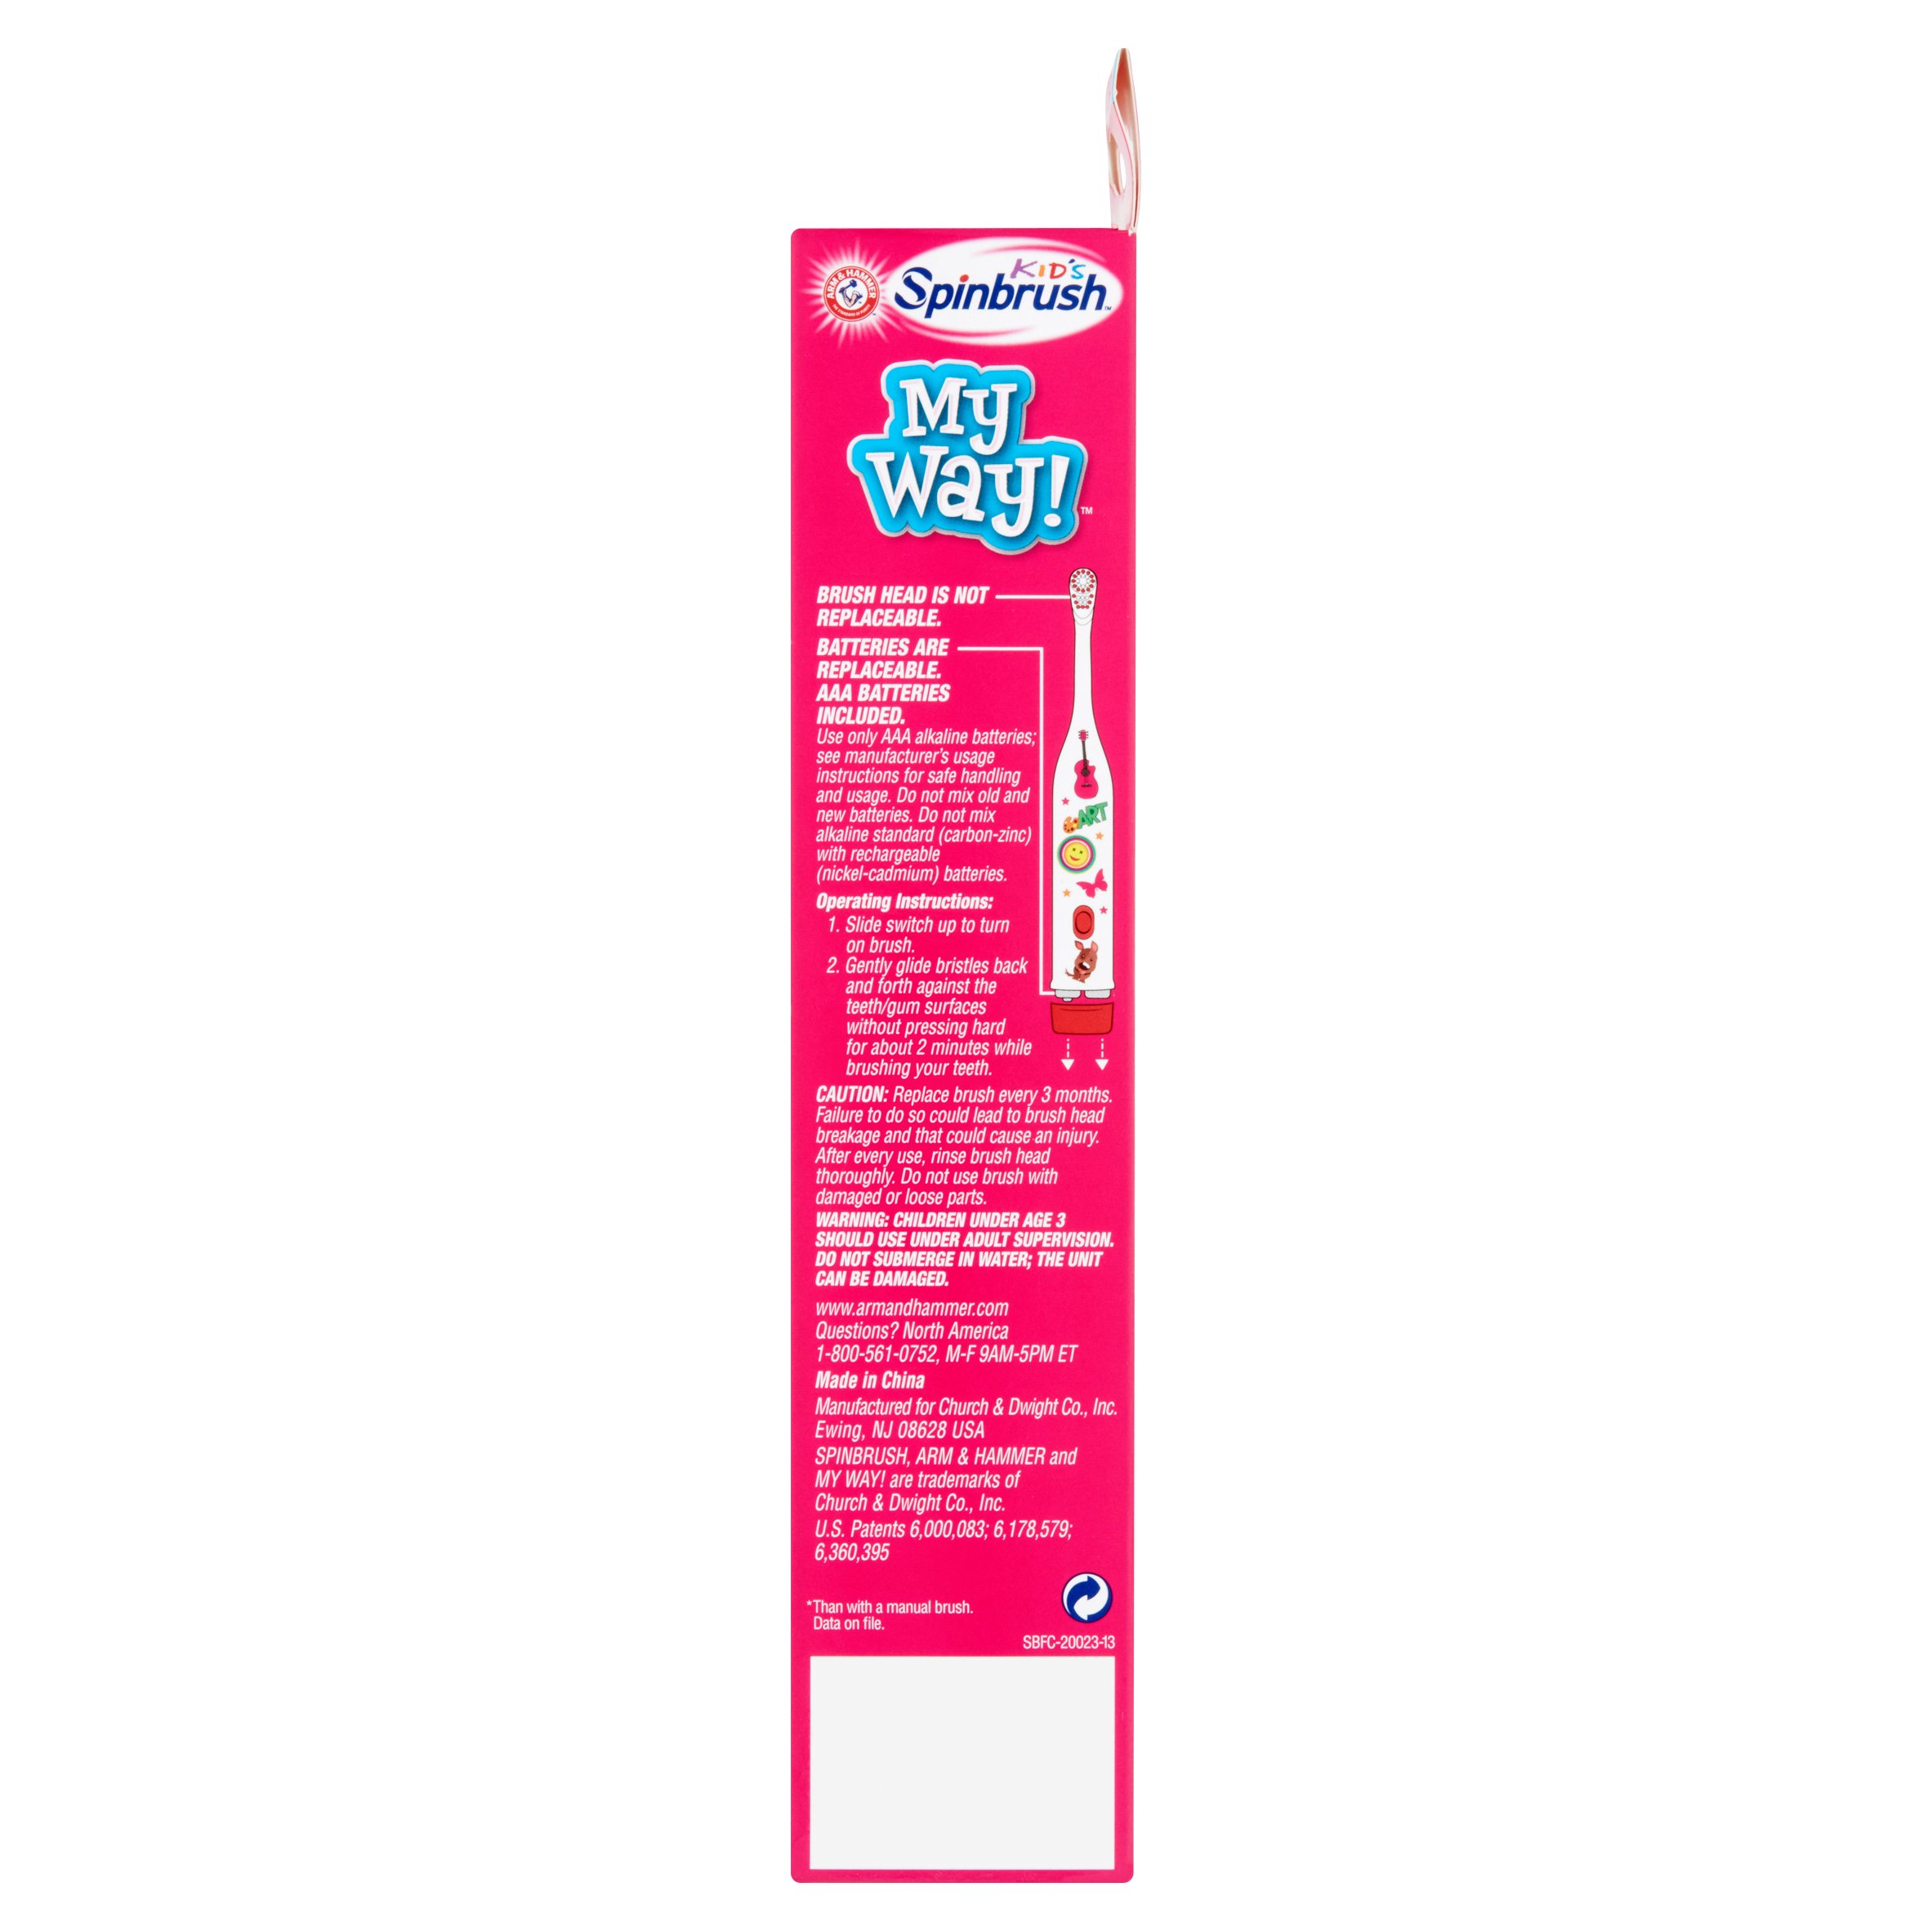 Arm & Hammer Spinbrush Kids Electric Battery Toothbrush, My Way!, 1 count - image 3 of 4